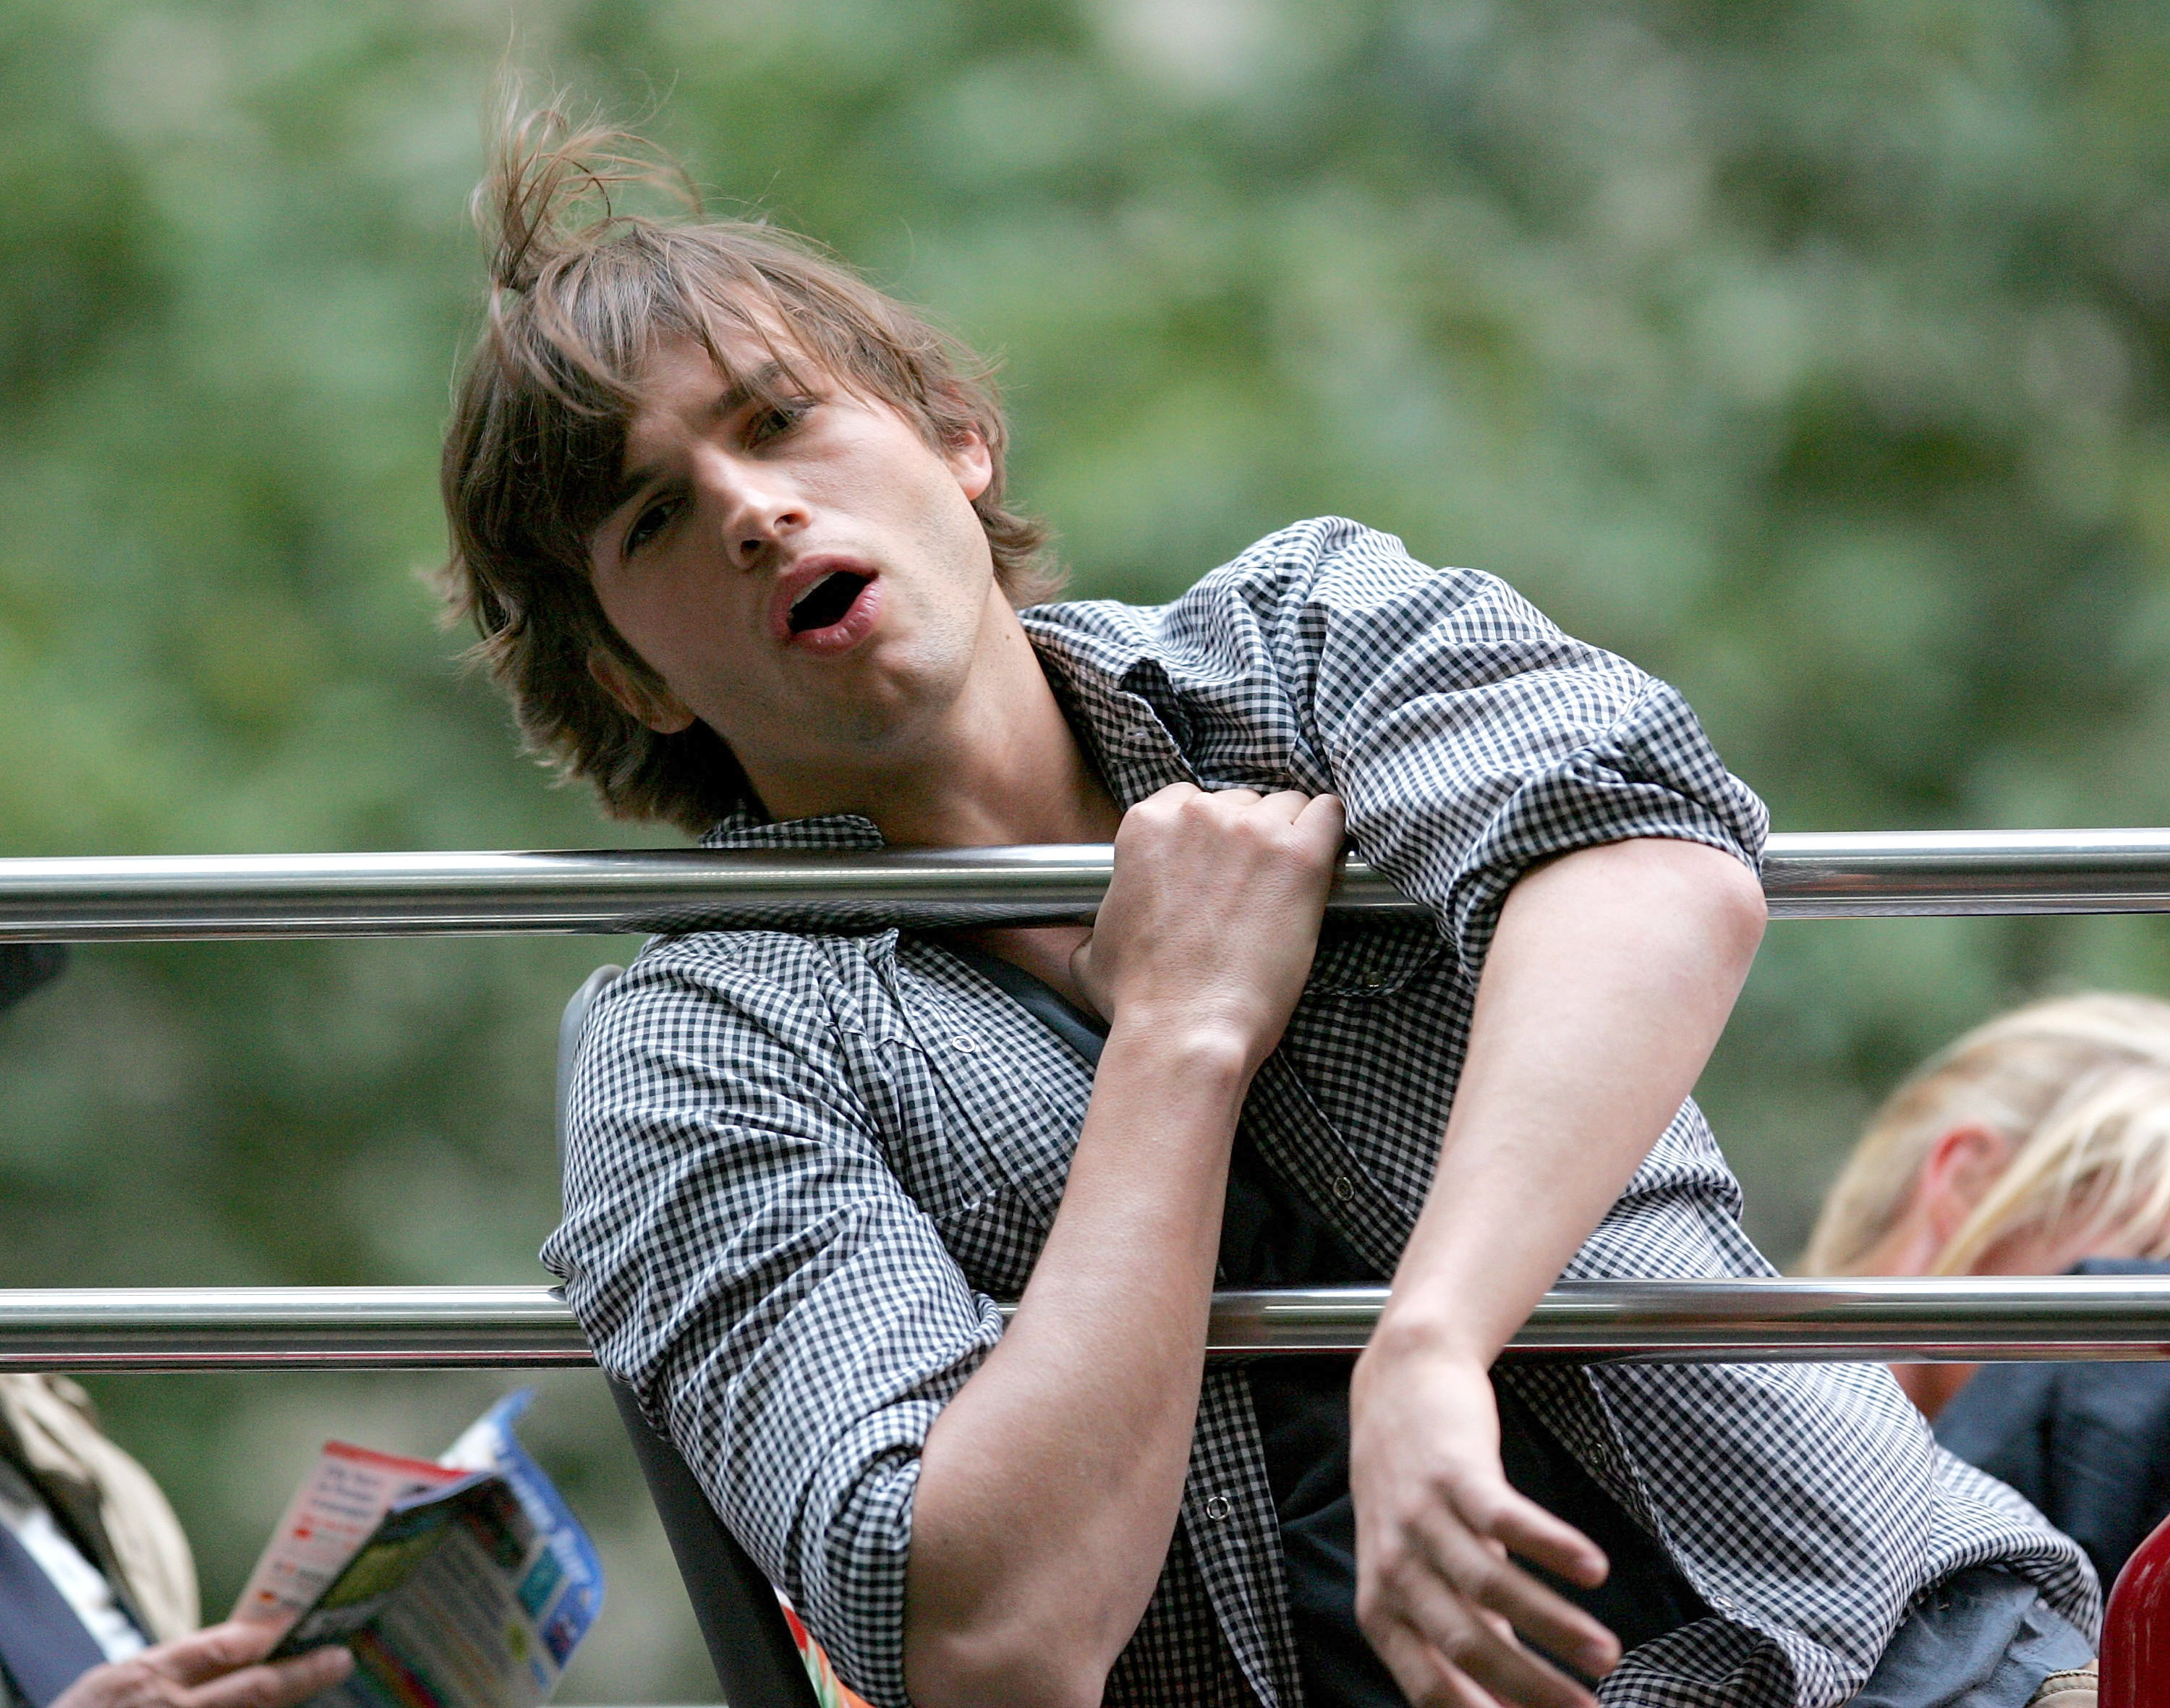 Ashton Kutcher on the set of "What Happens in Vegas" in New York City on October 2, 2007. | Source: Getty Images